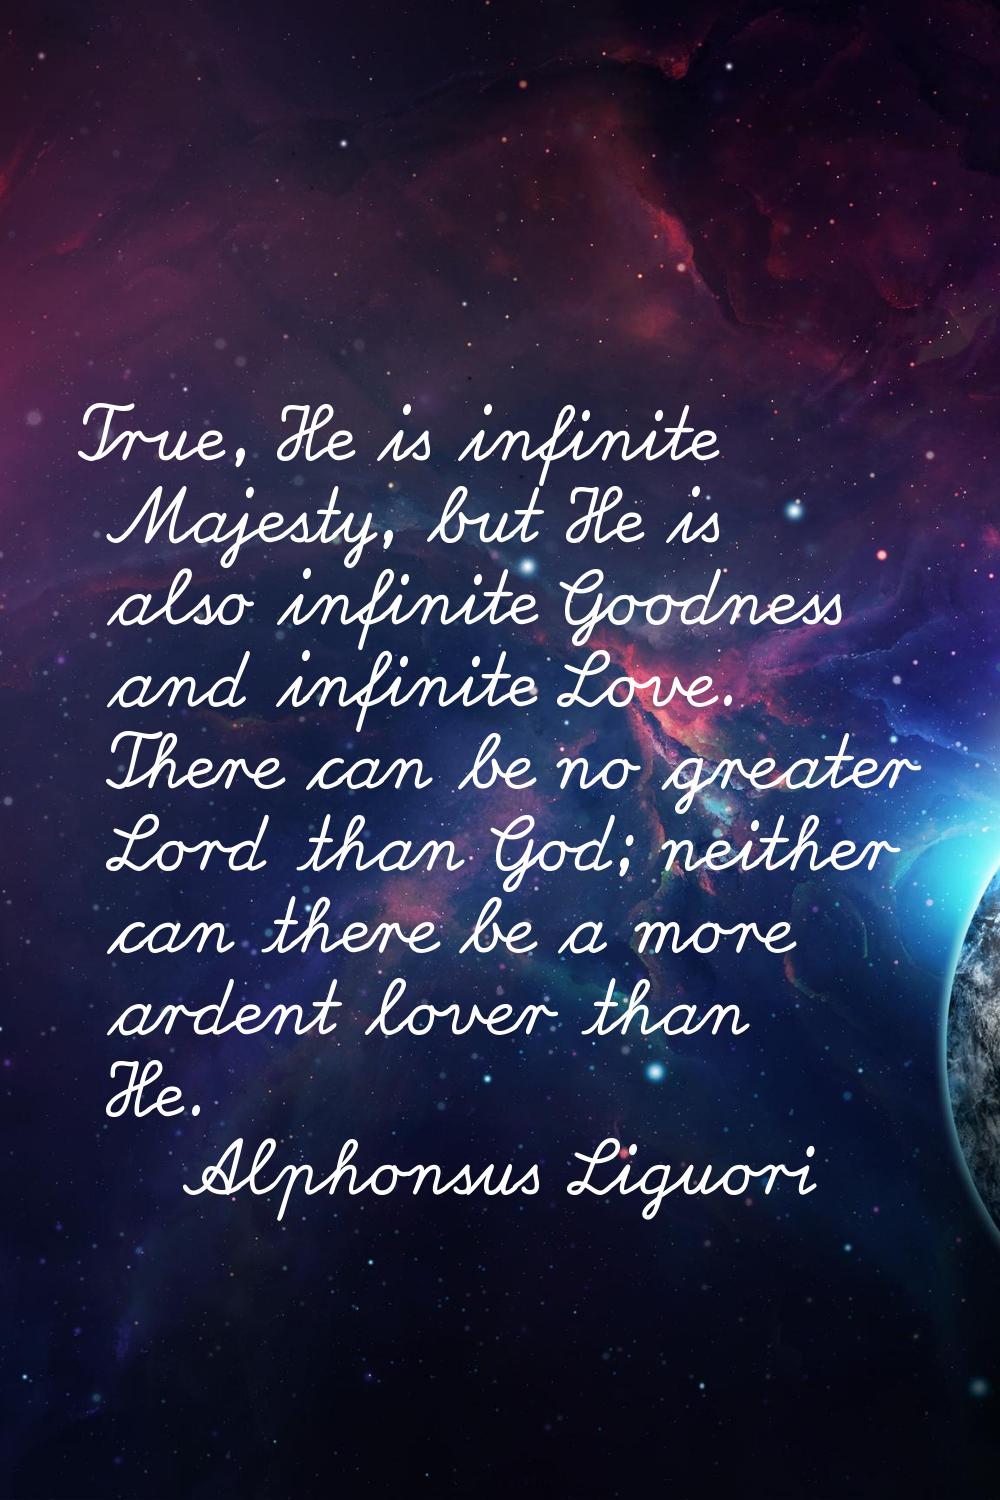 True, He is infinite Majesty, but He is also infinite Goodness and infinite Love. There can be no g